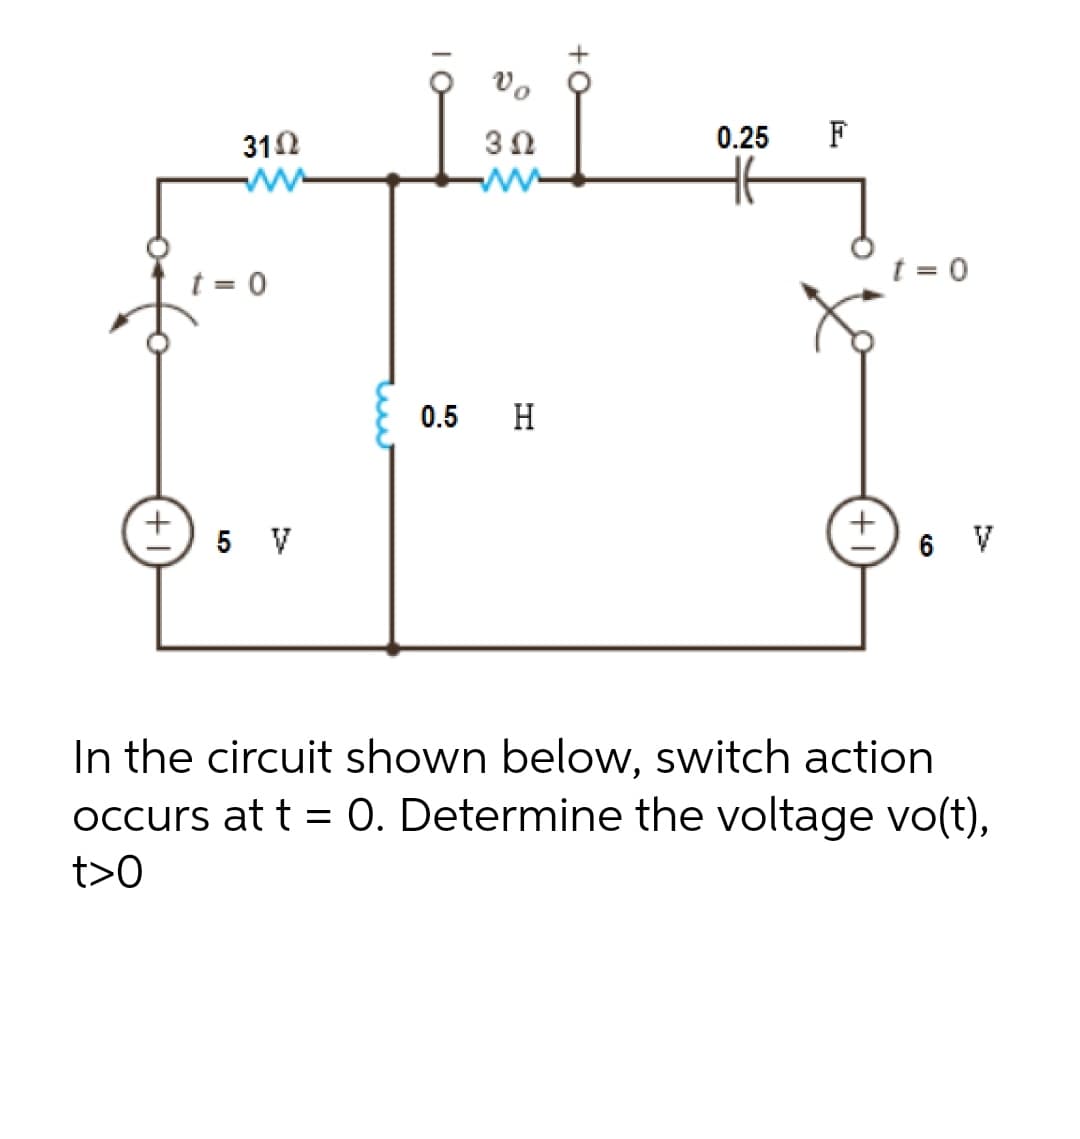 0.25
F
310
ww
t = 0
t = 0
0.5
H
5 V
6 V
In the circuit shown below, switch action
occurs at t = 0. Determine the voltage vo(t),
t>0
+1
